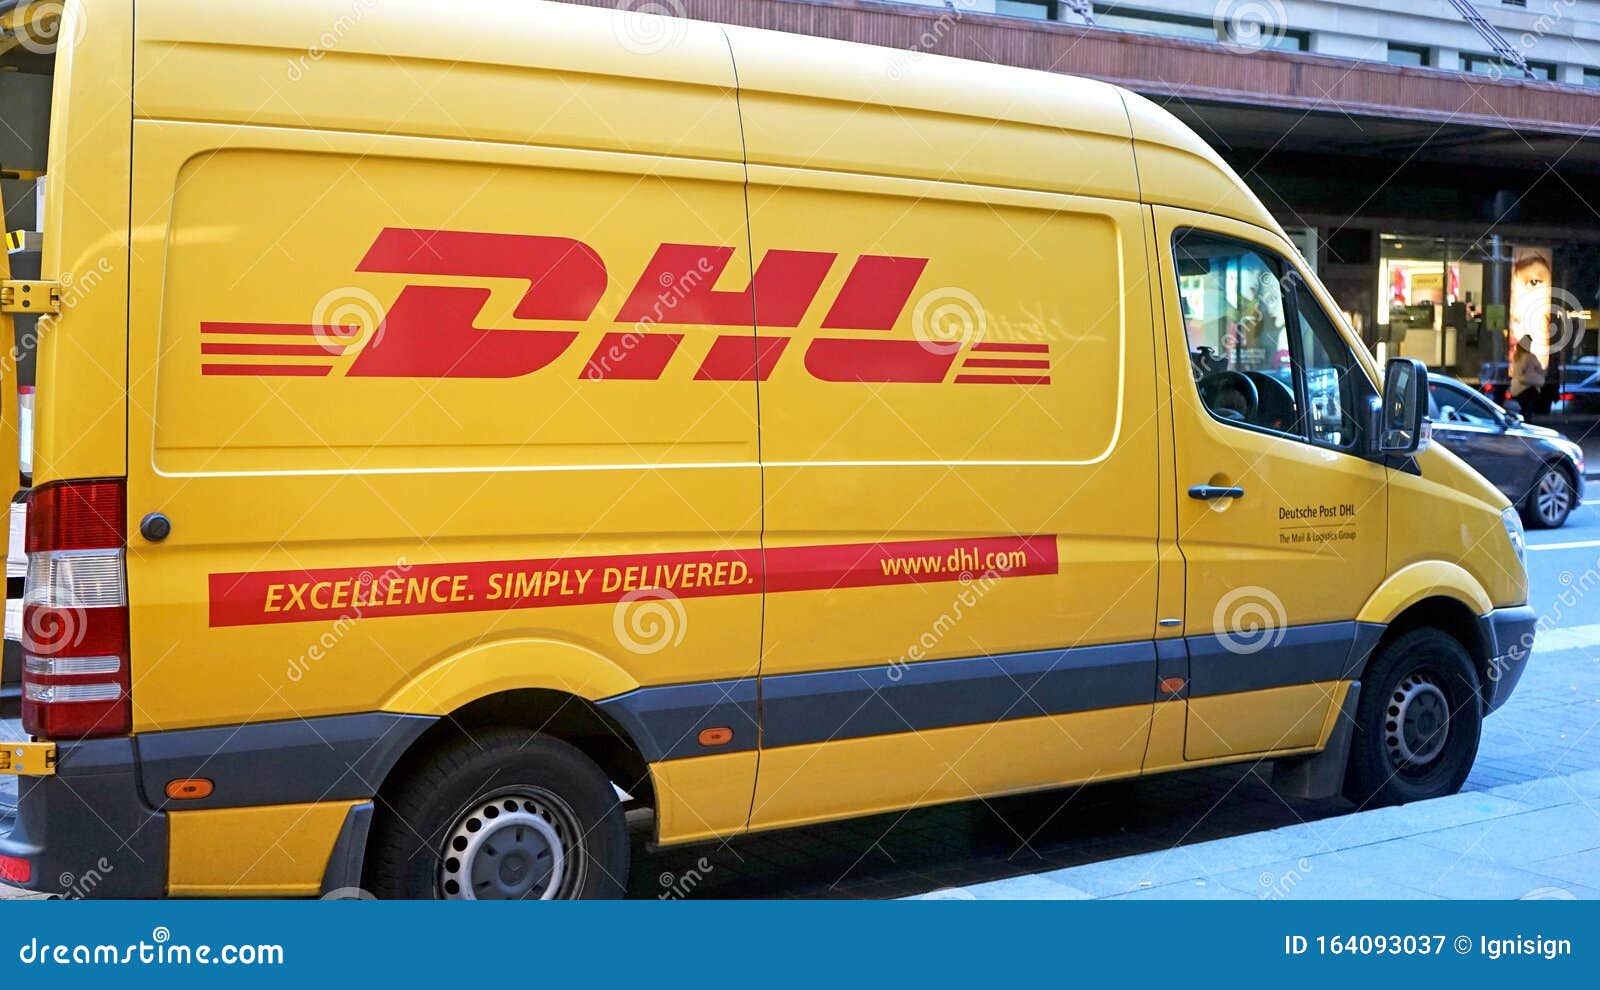 DHL Delivery Dhl Global Leader in Logistics Industry. it Commits Its Expertise in Express International Parcels Del Editorial Photography - Image of cargo, commerce: 164093037